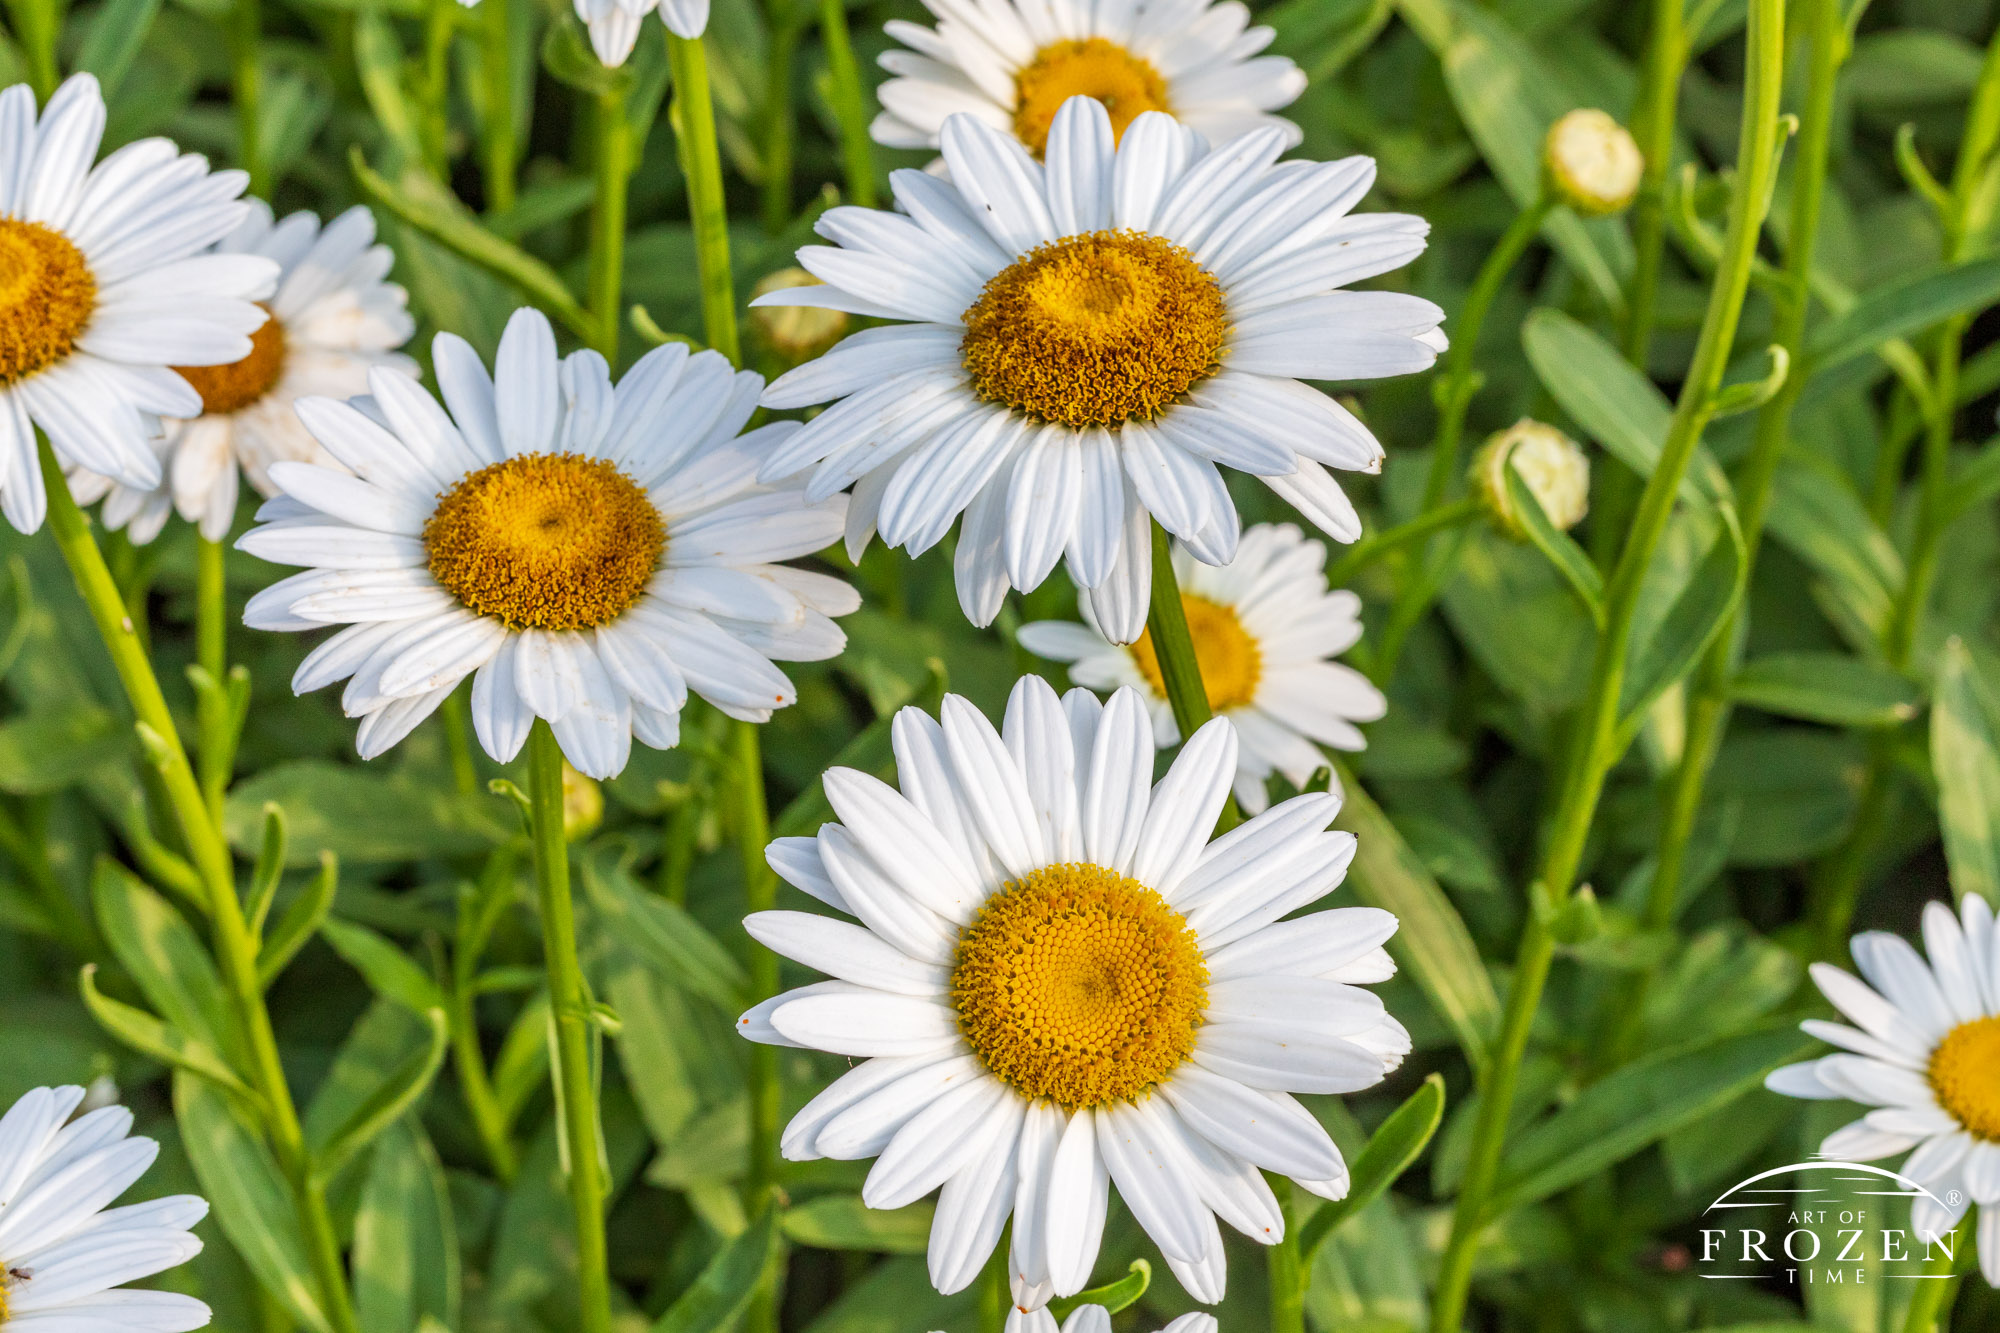 Close view of an Ox-eye Daisy featuring its many white petals and yellow sunflower-like center